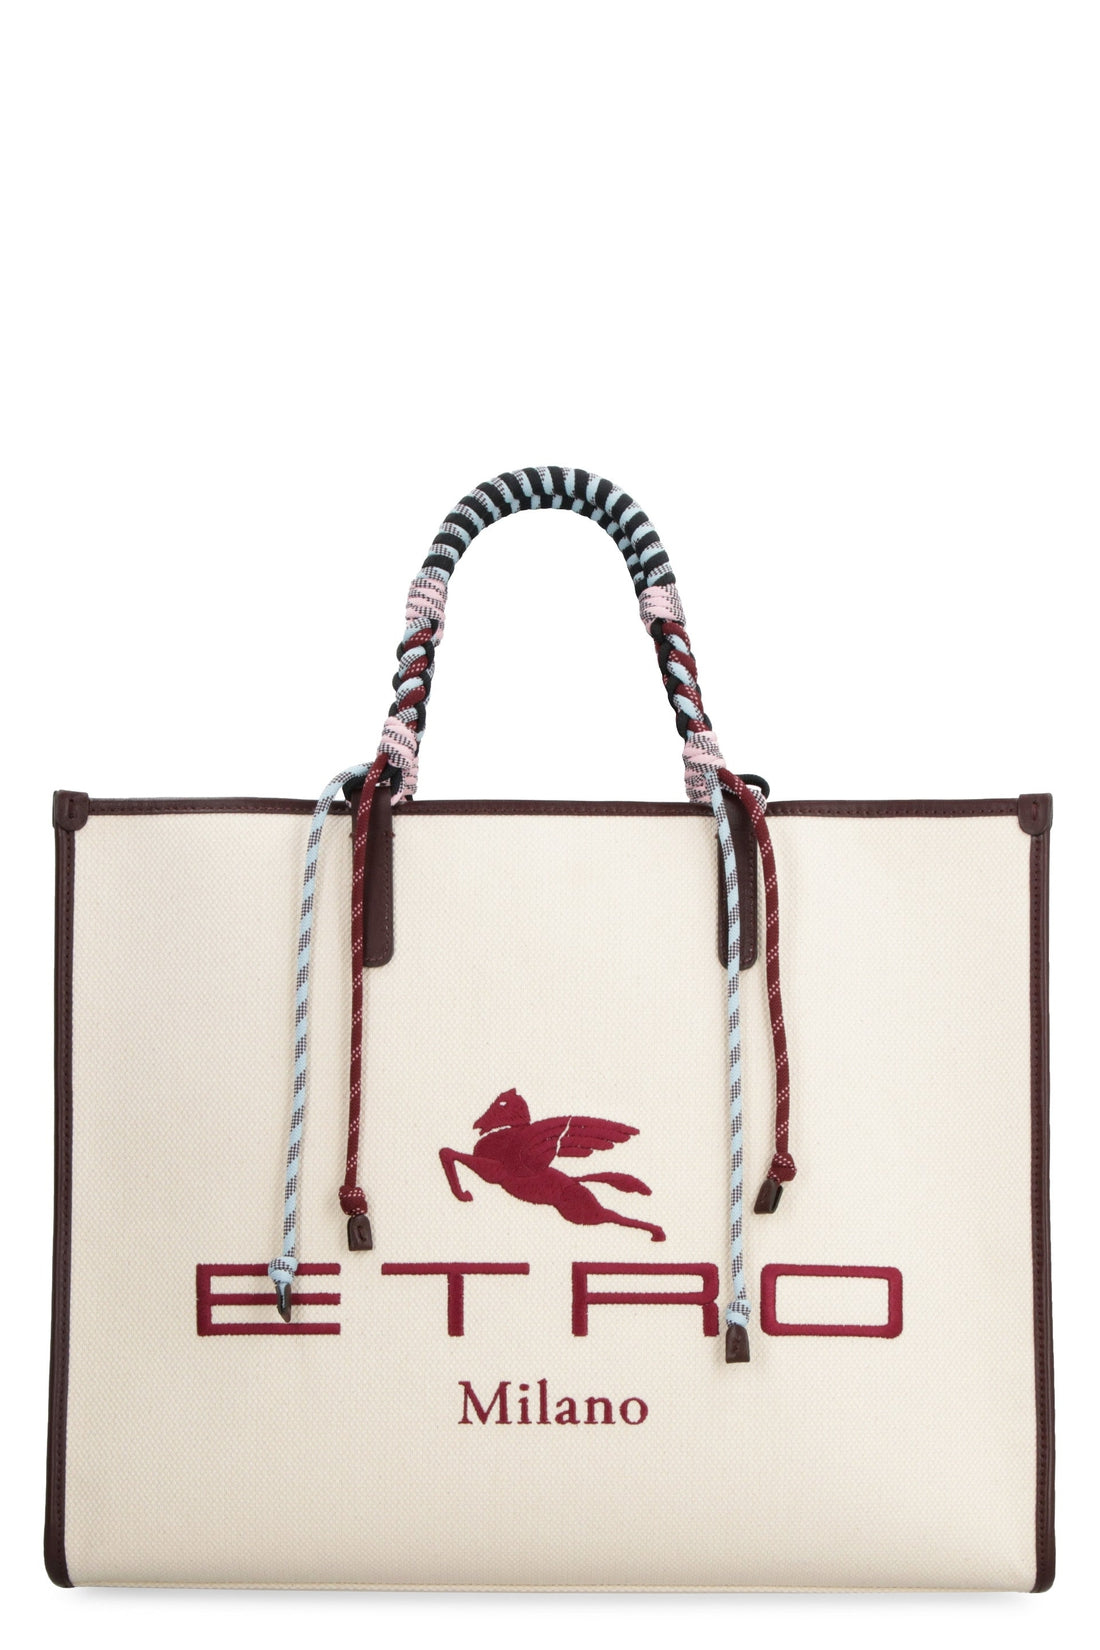 Etro-OUTLET-SALE-Canvas and leather tote bag-ARCHIVIST